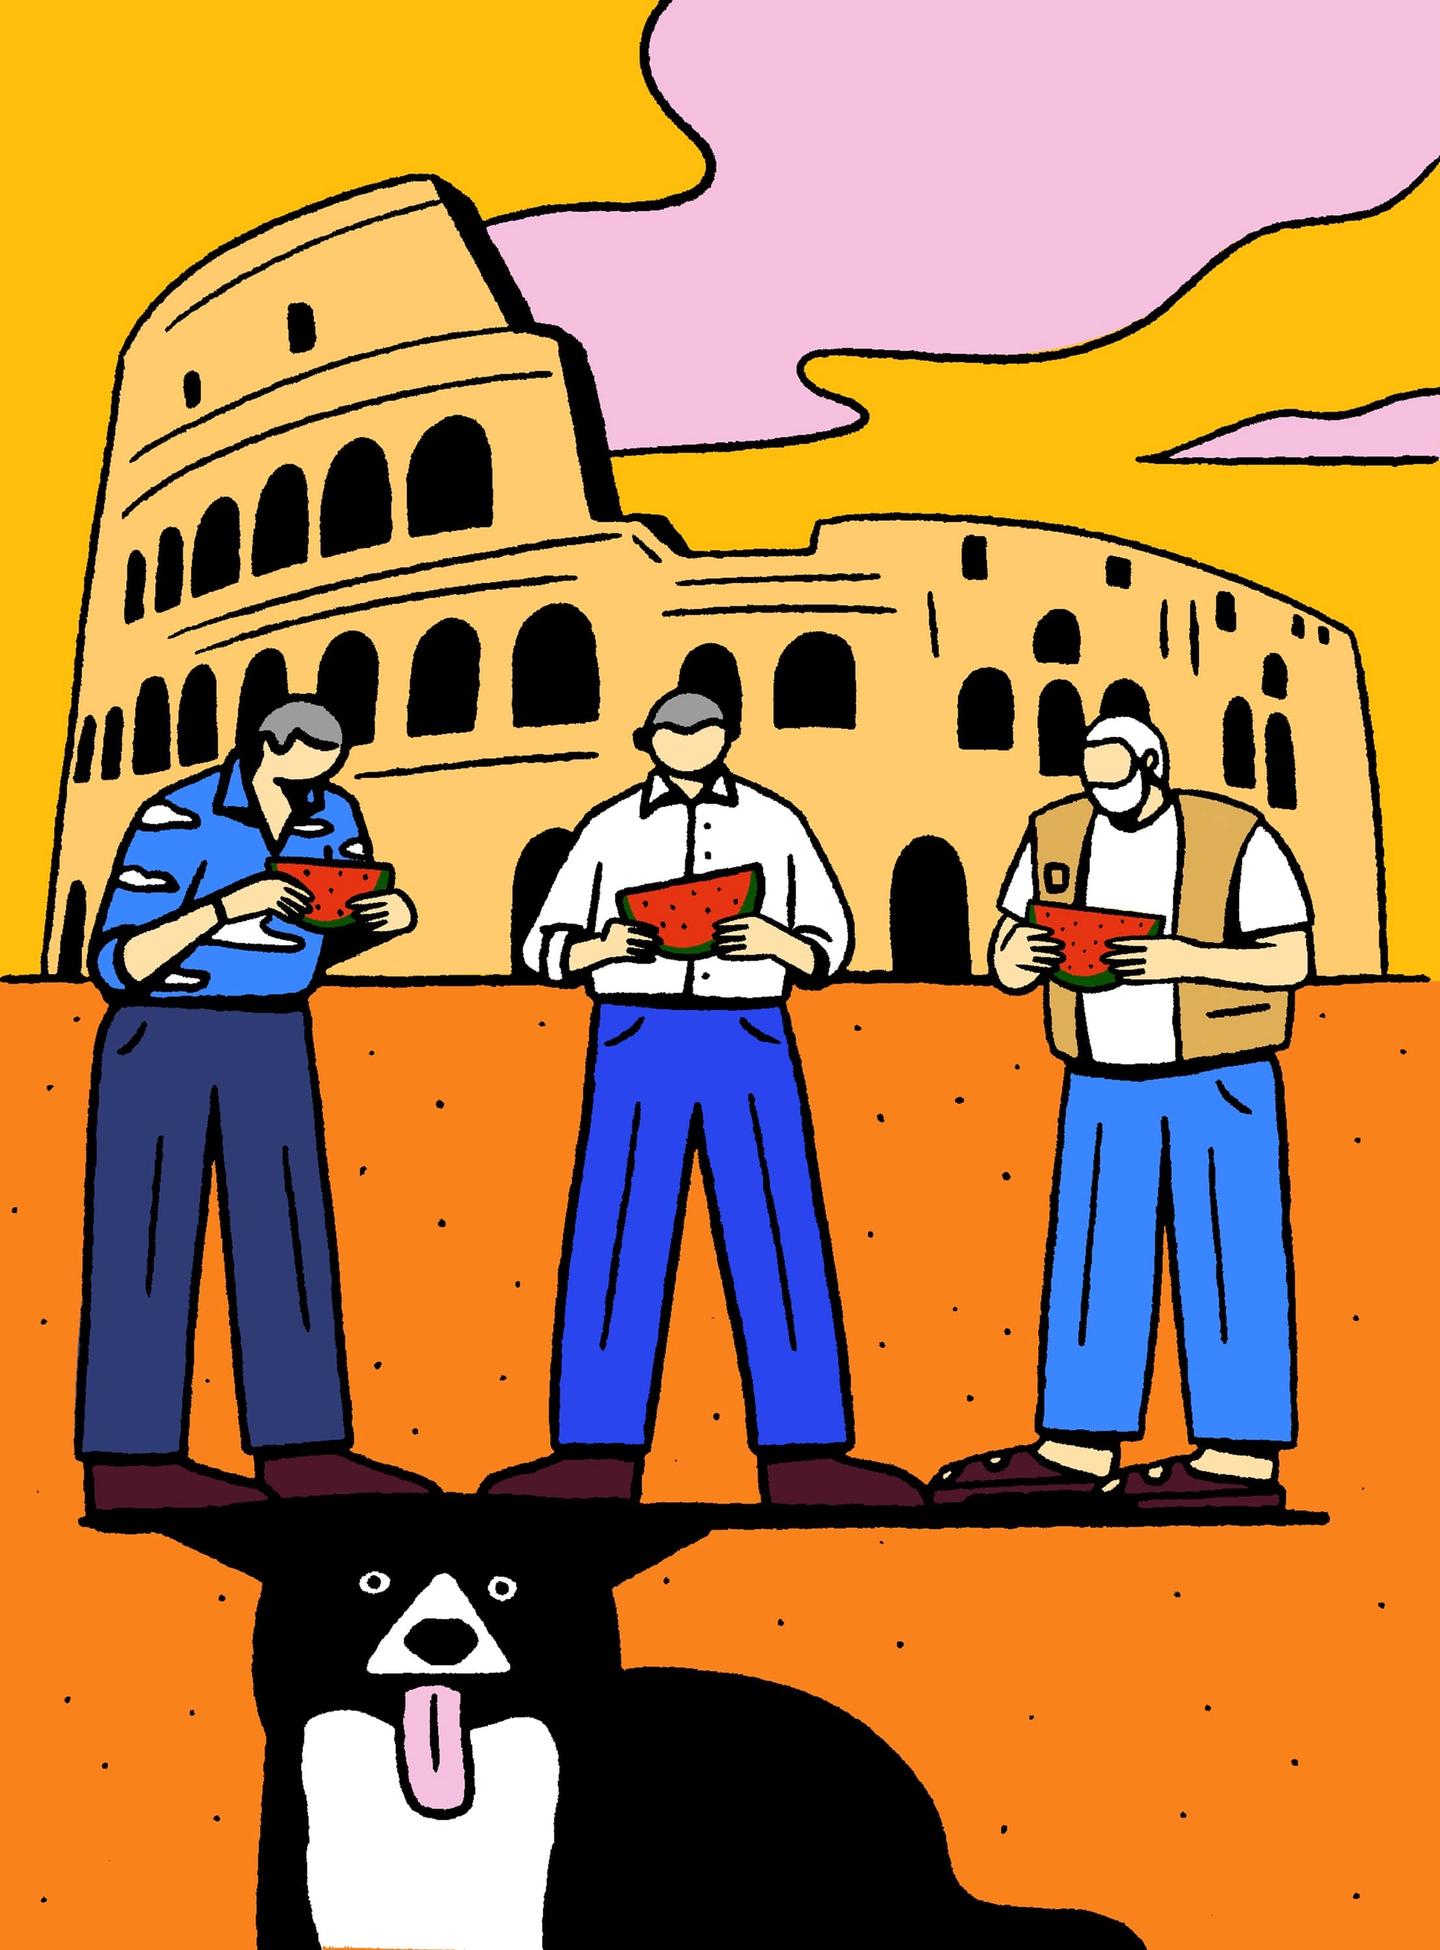 Three old gentlemen eating a watermelon in front of the Roman colosseum and a dog also with them. 